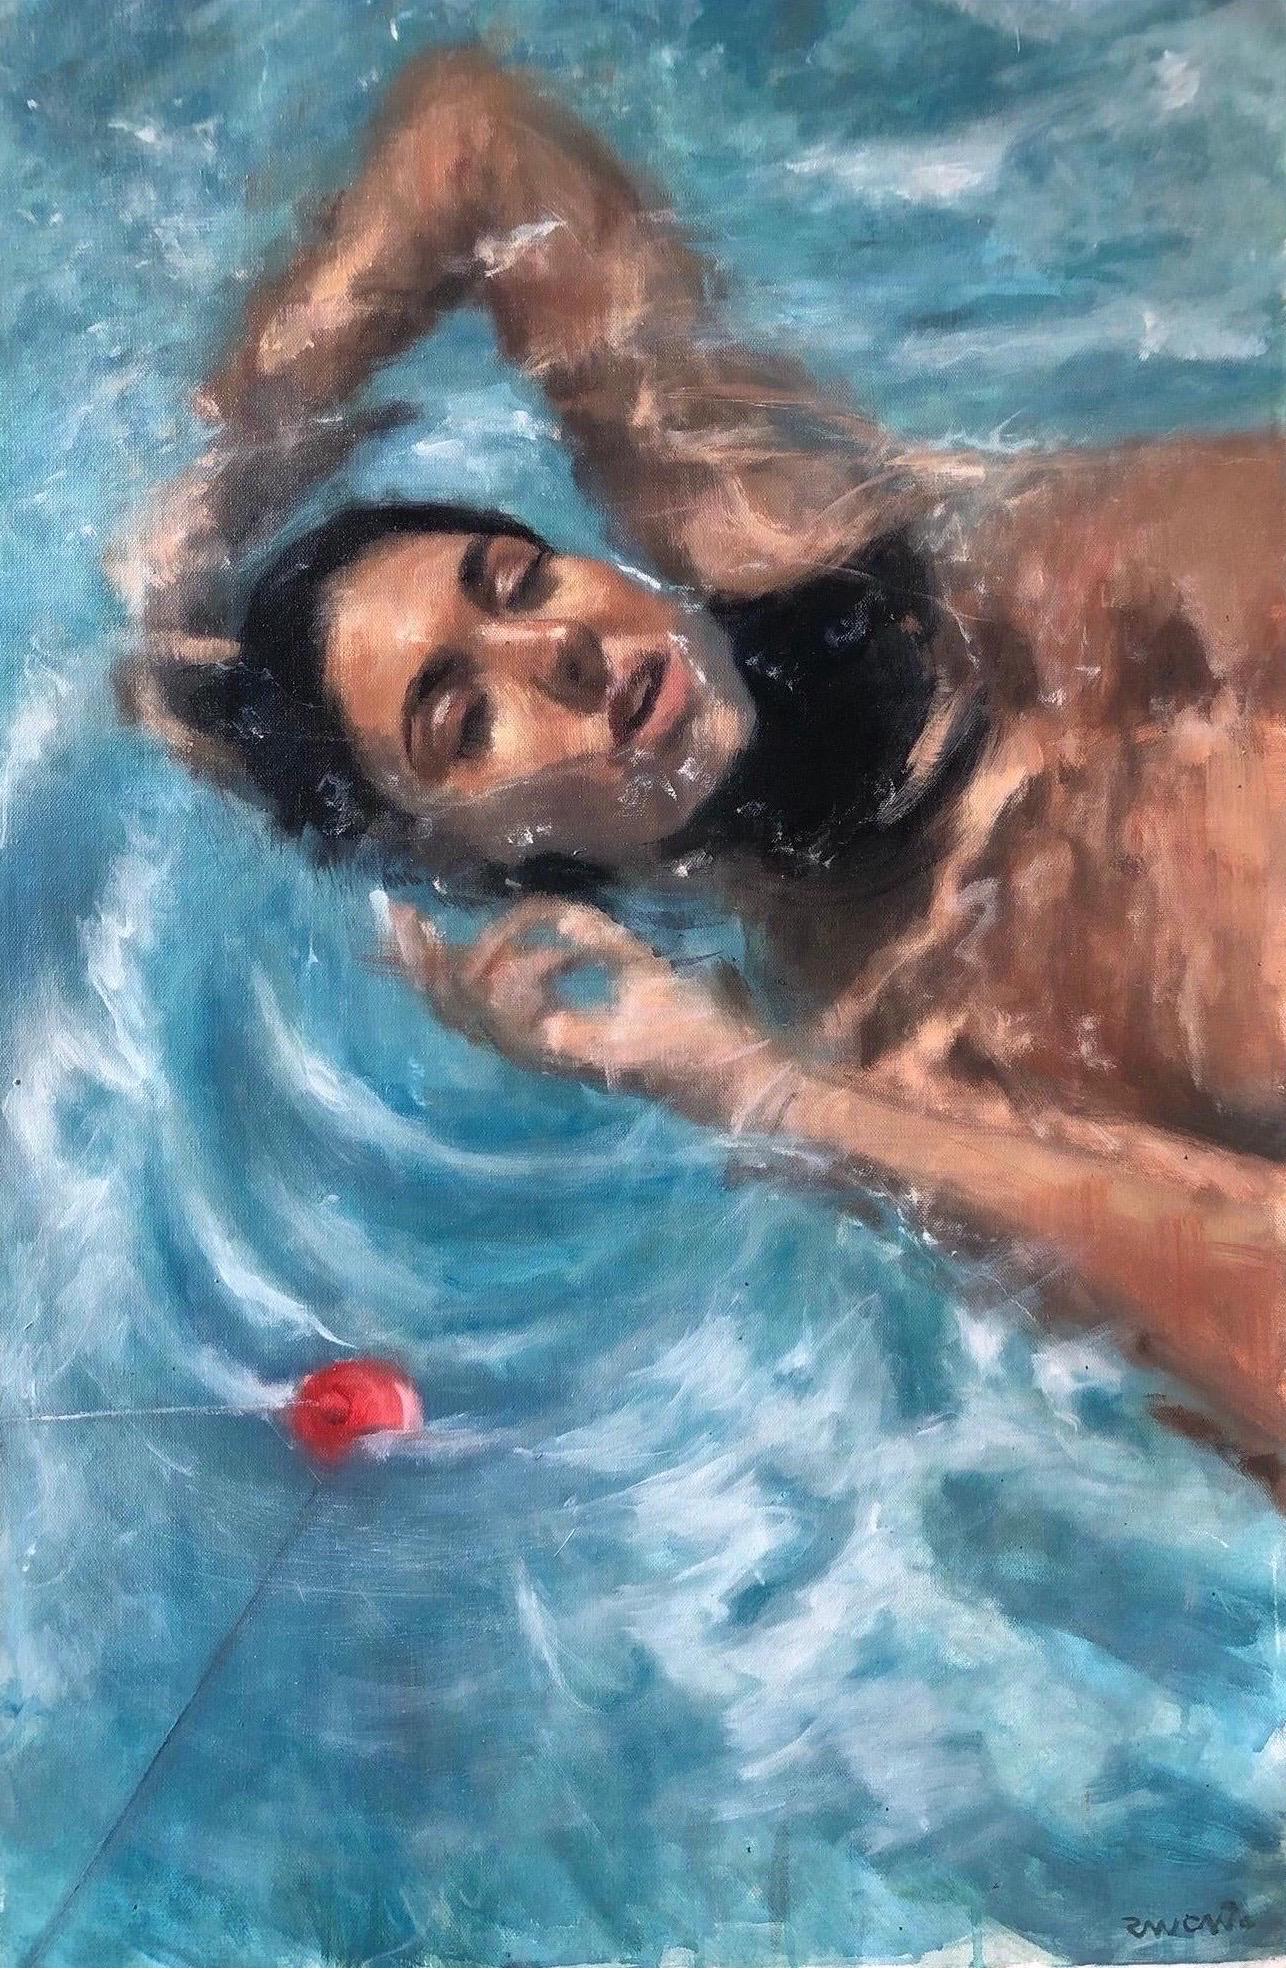 Carlos Antonio Rancano Figurative Painting - Oil on Canvas Titled "Catch of the Day”